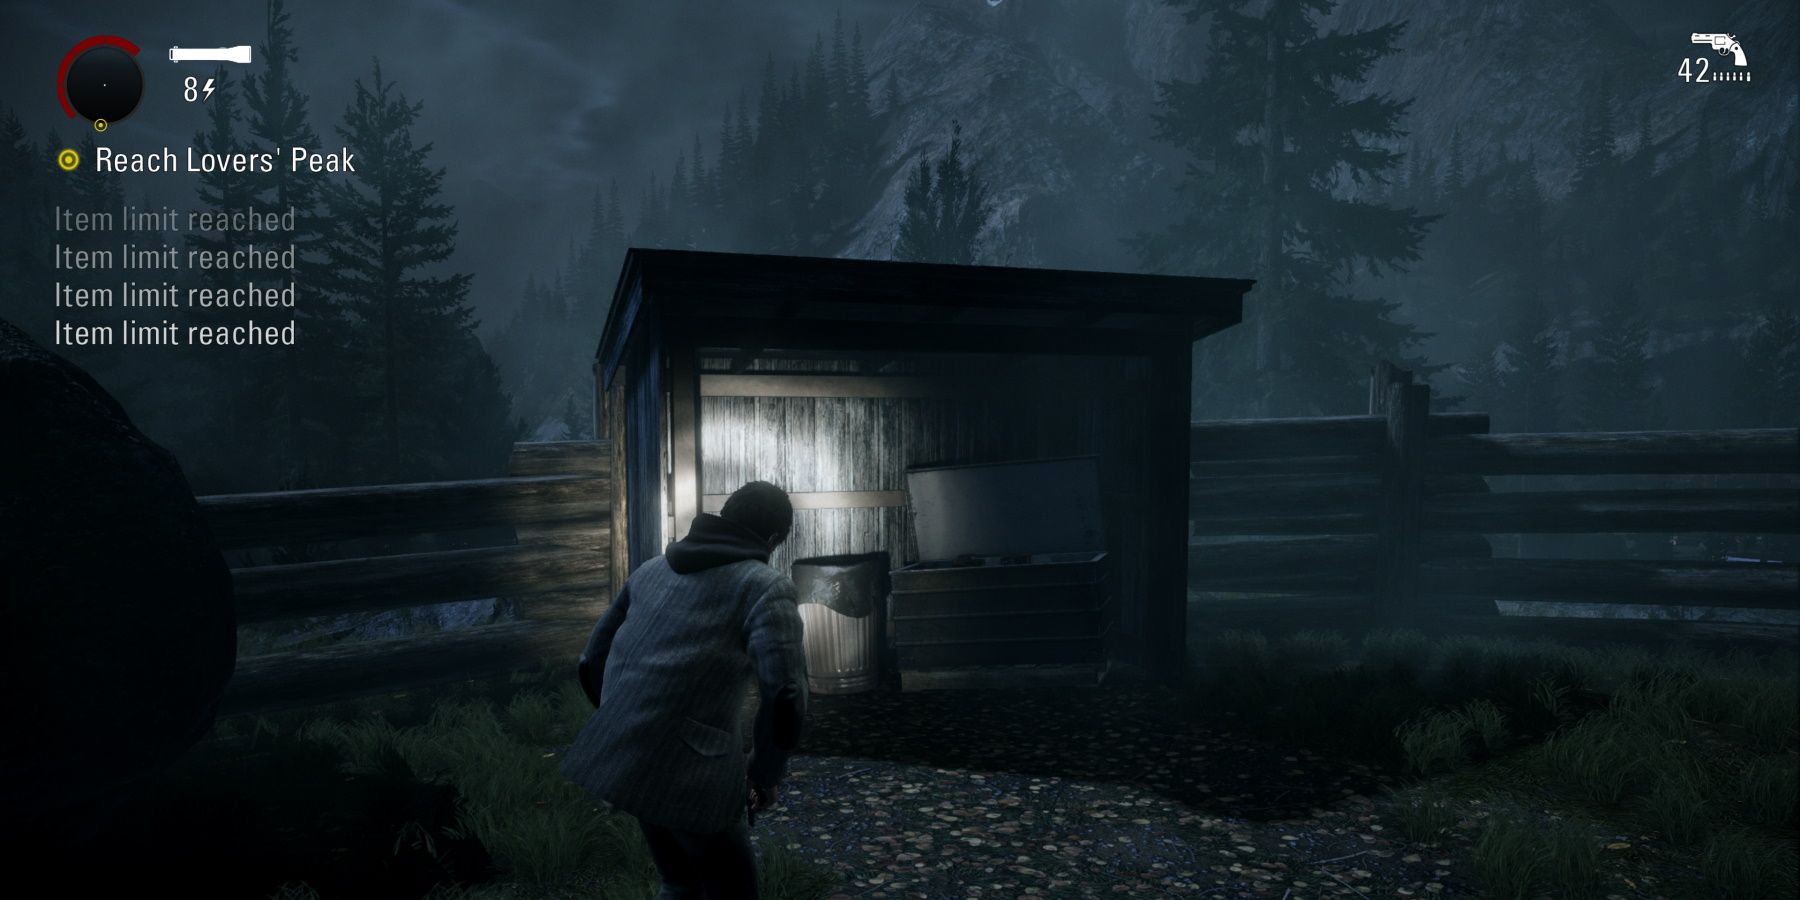 Alan Wake Remastered visitor centre back with ammo box supply